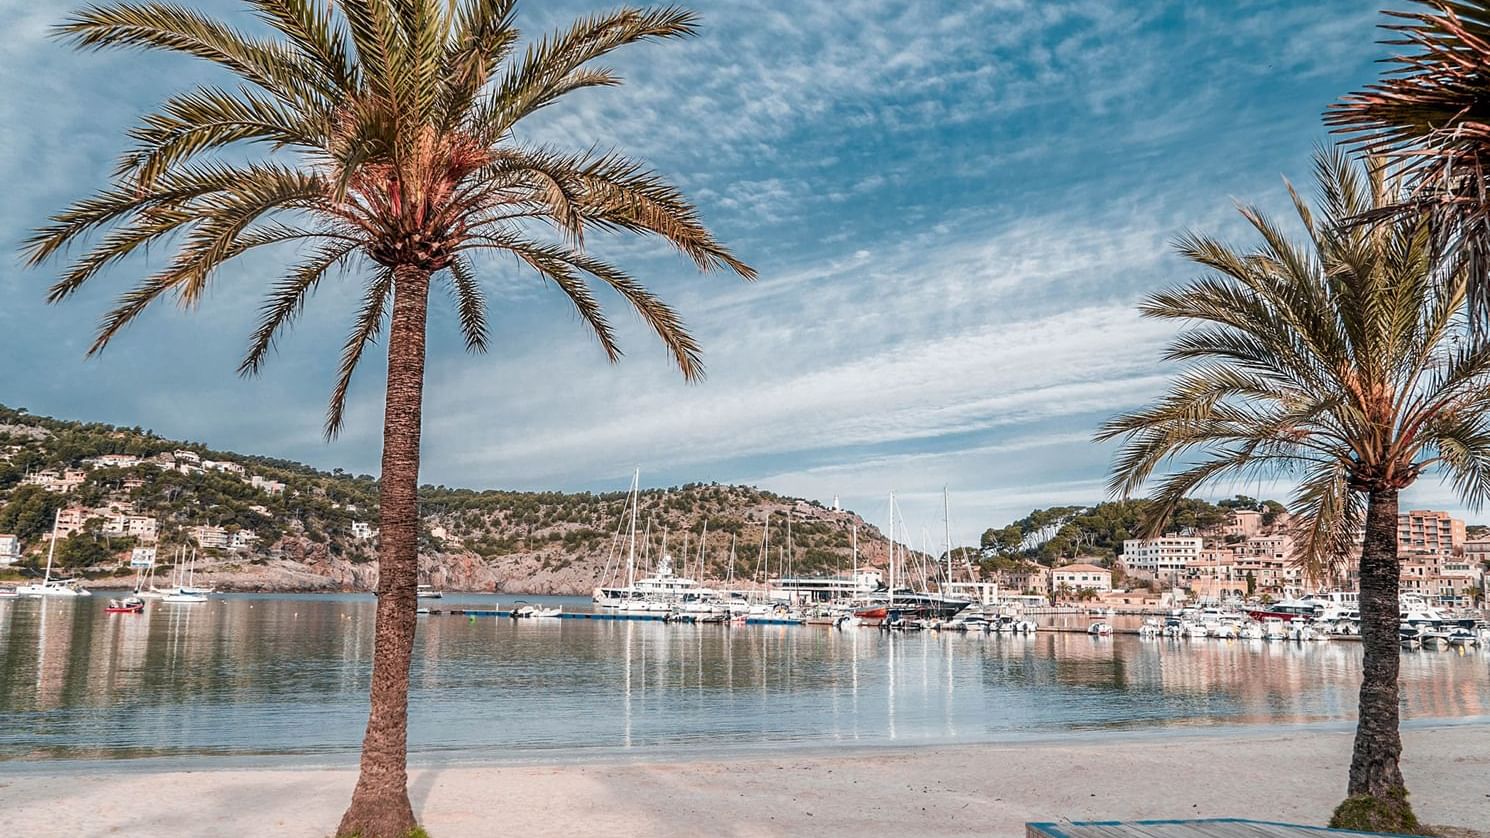 Top 10 Things to Do in Soller and Surrounding Area - The Other Mallorca